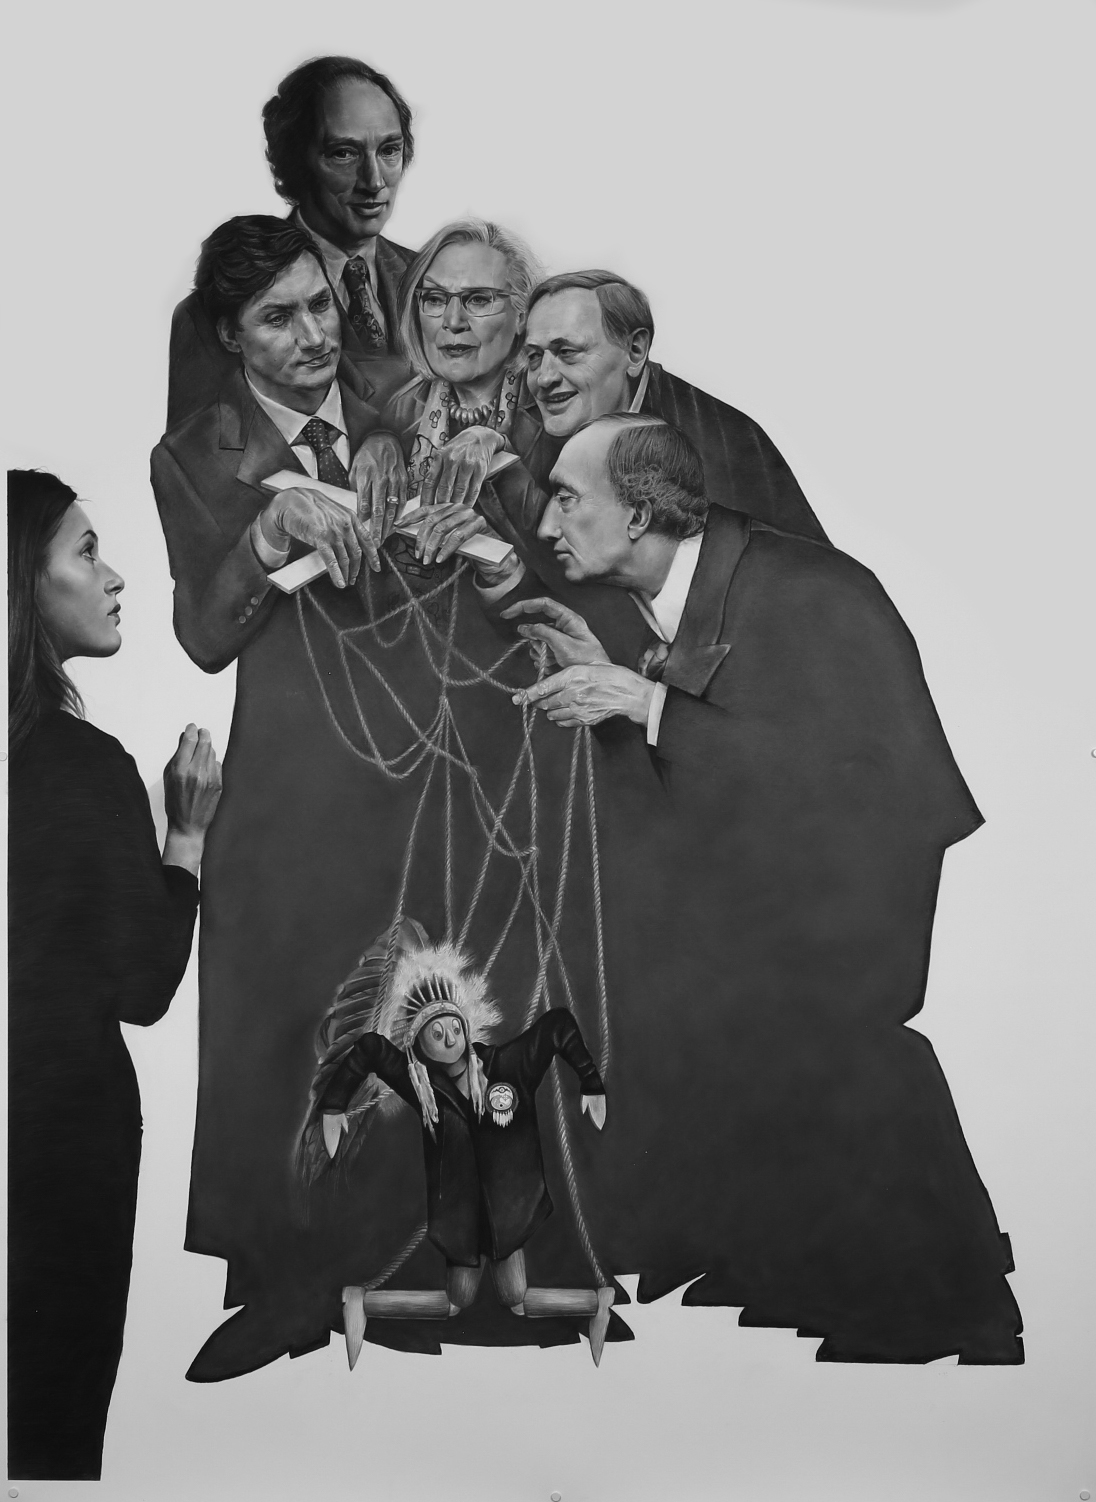 Pencil drawing entitled "Reconcile What" featuring Mary McPherson looking at Canadian prime ministers Justin Trudeau, Pierre Elliot Trudeau, Jean Chretien, and Sir John A. MacDonald, along with former Crown-Indigenous Relations Minister Carolyn Bennett, controlling a puppet of an Indigenous chief